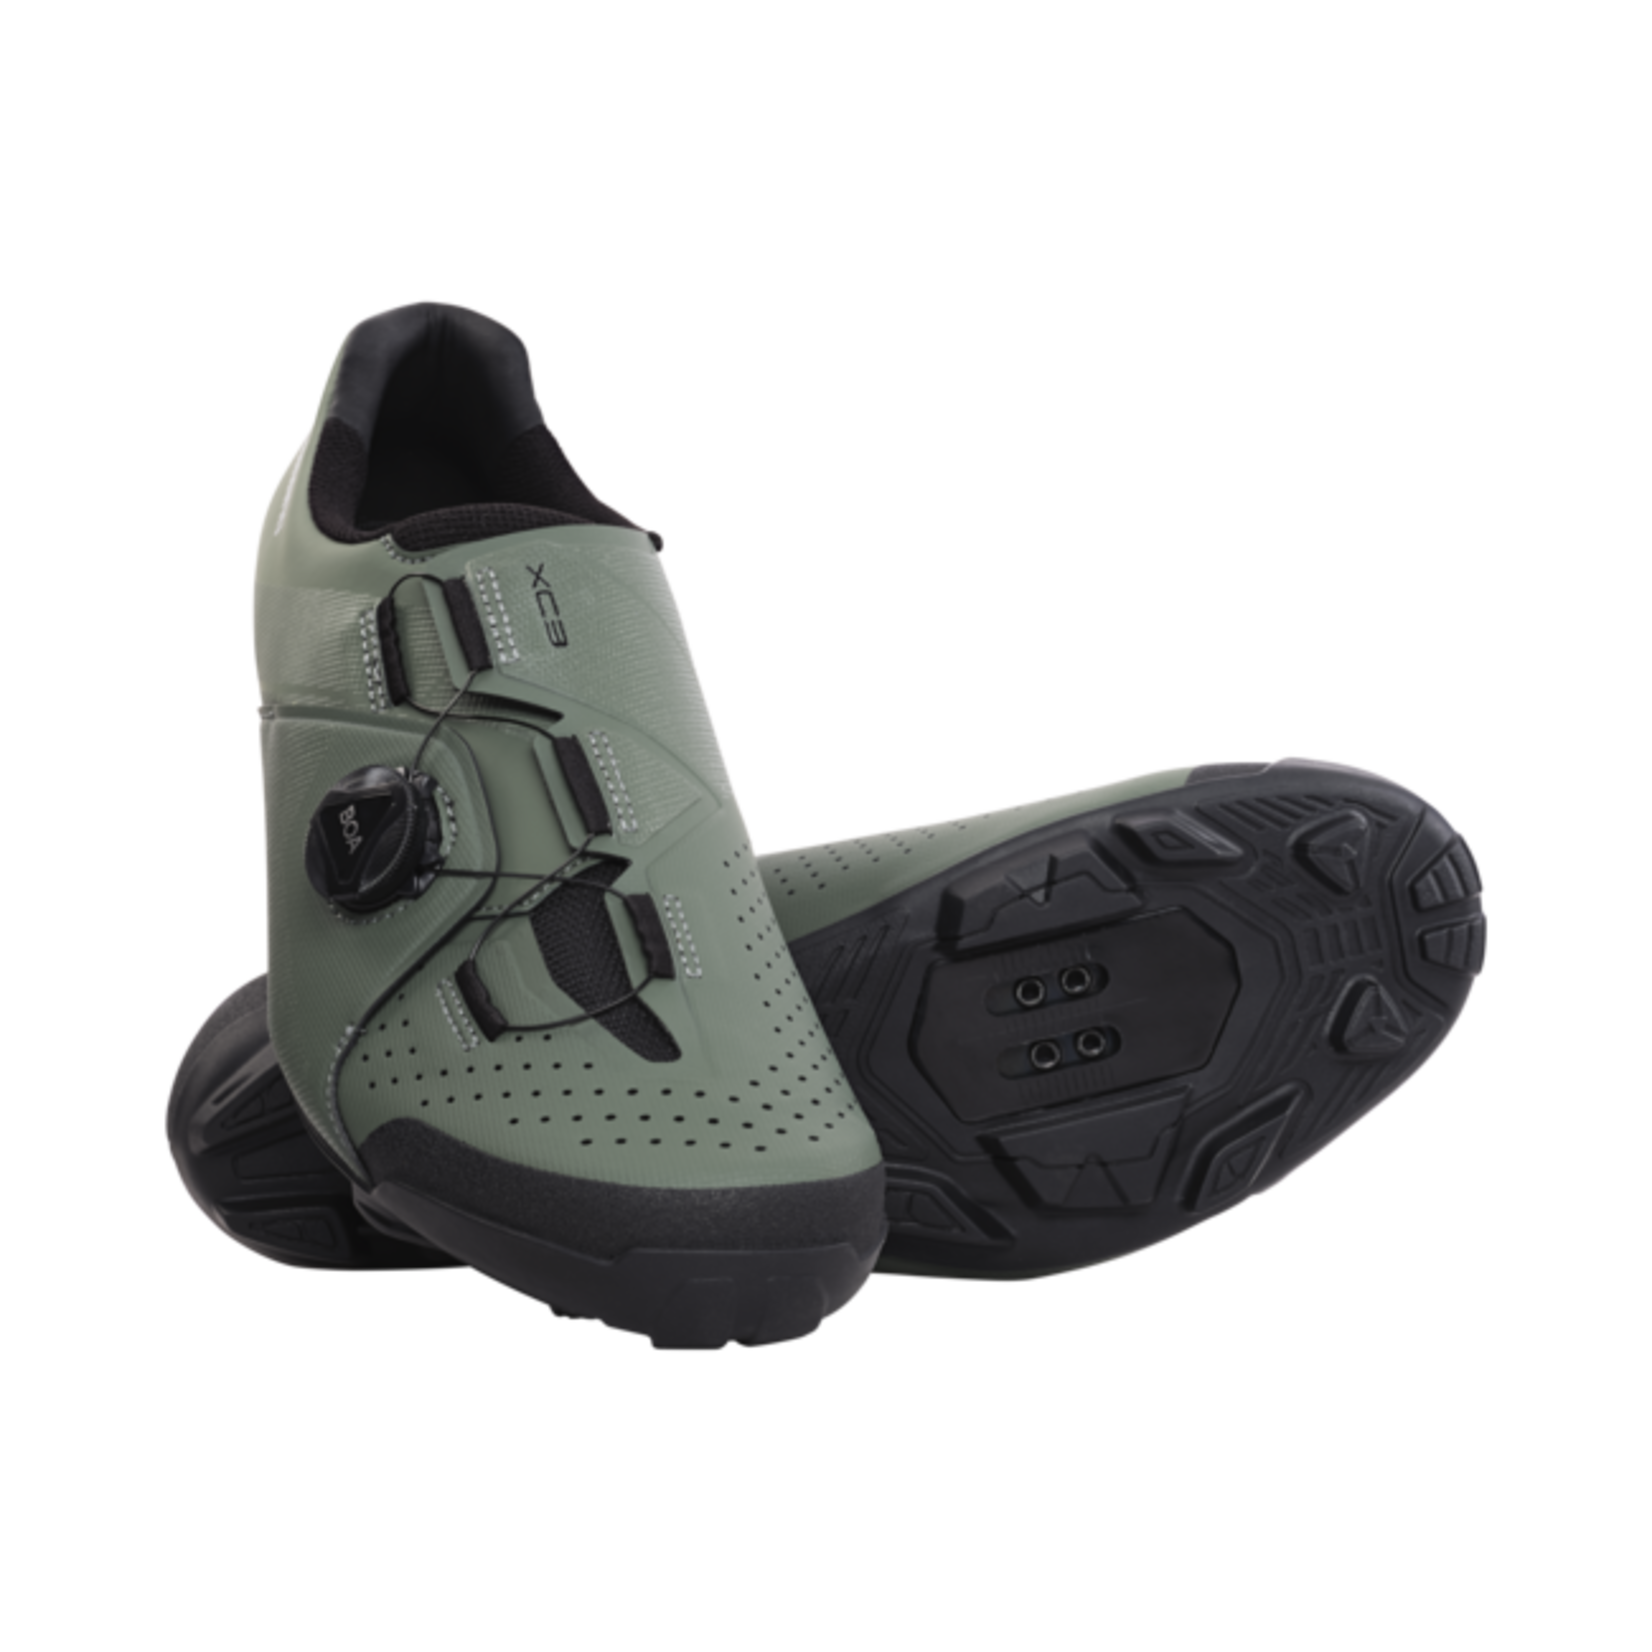 SHIMANO SH-XC300 BICYCLE SHOES | OLIVE 44.0